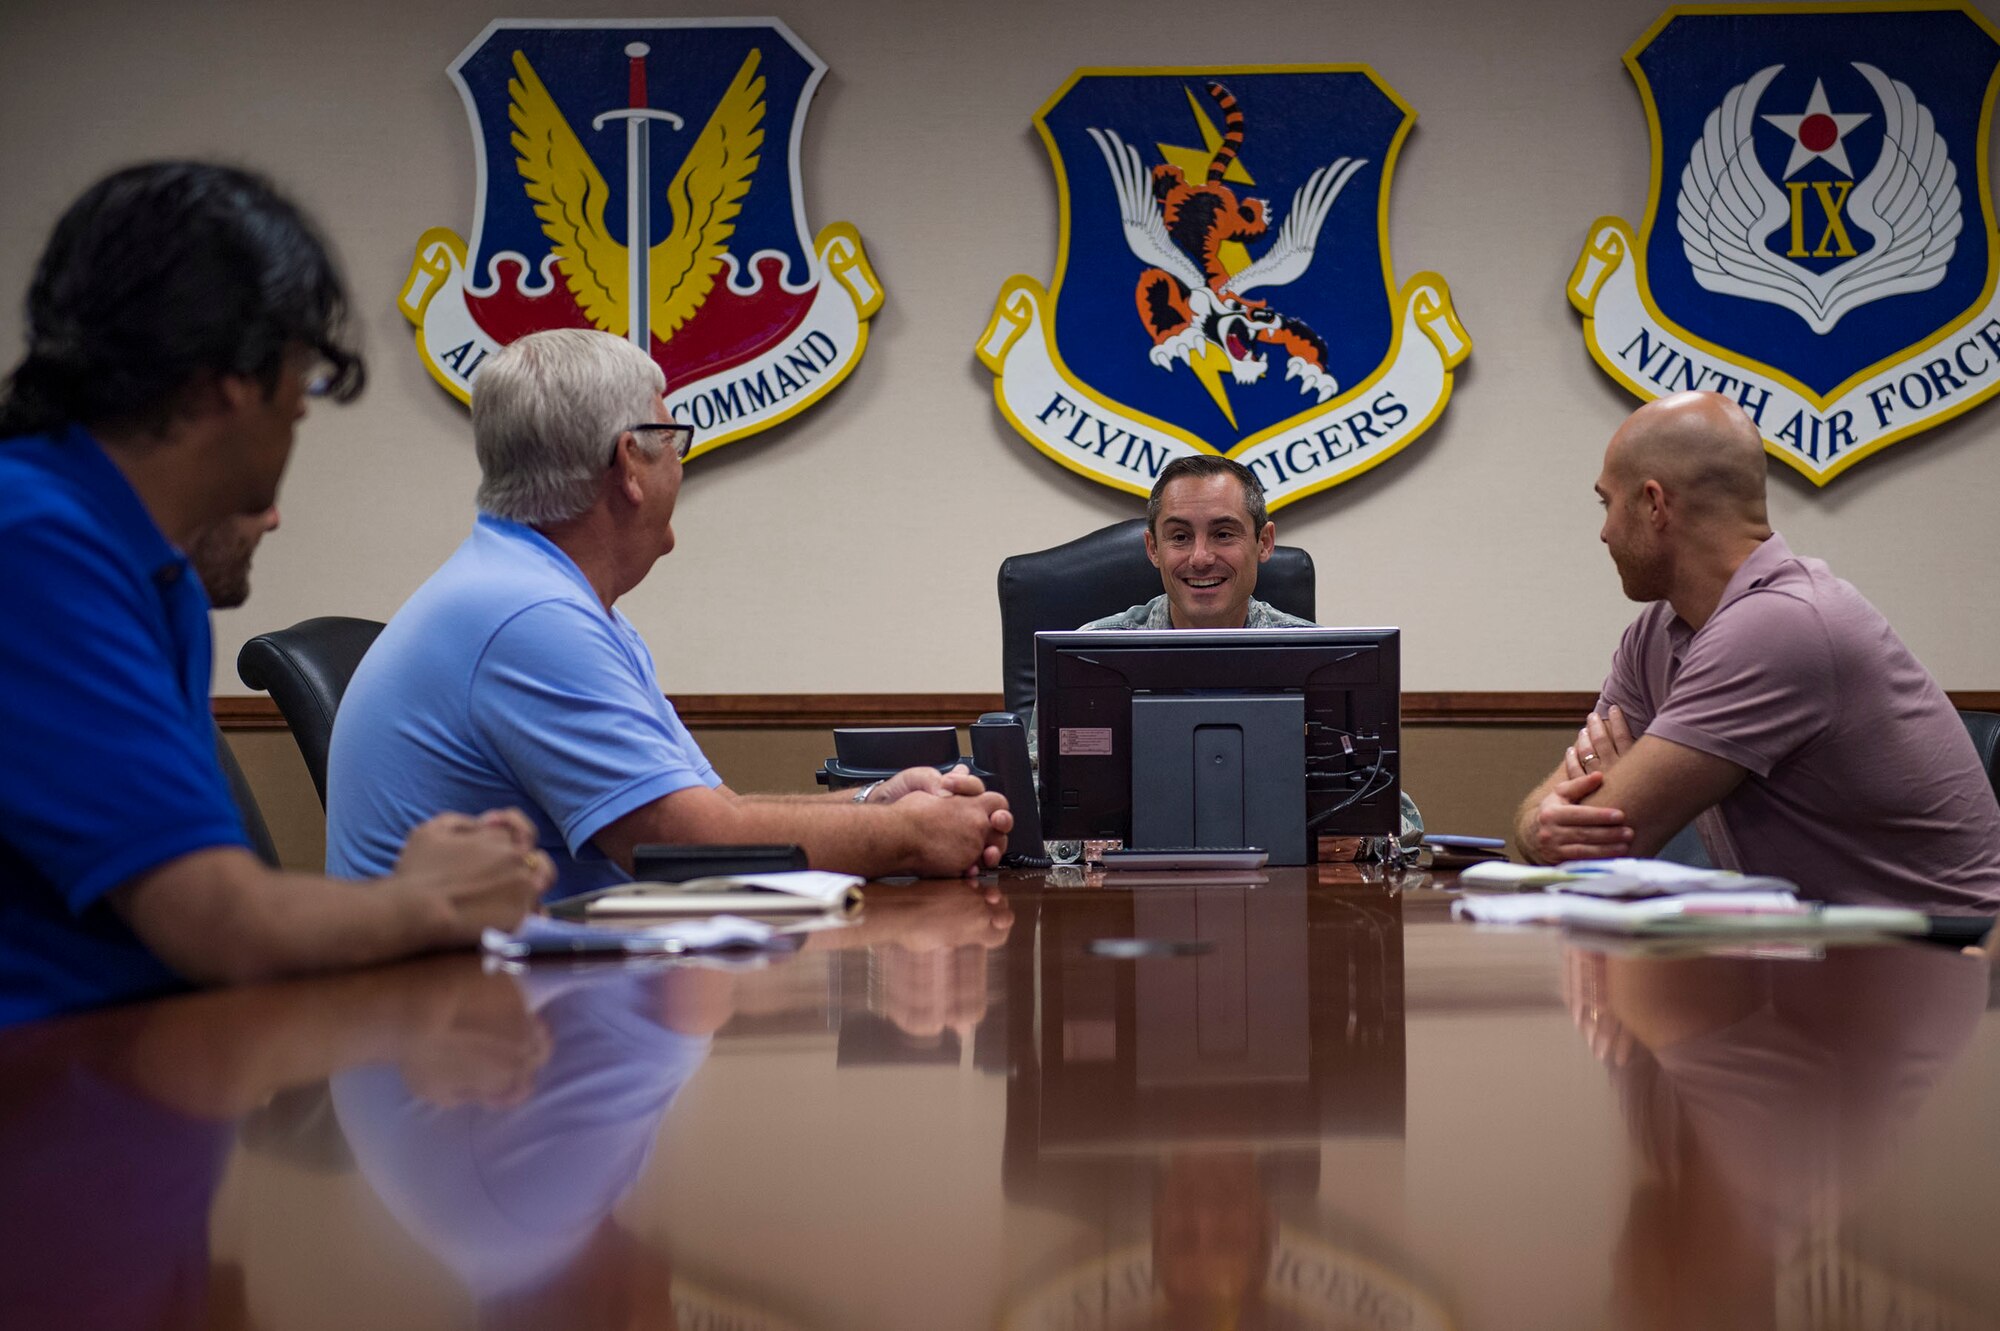 Col. Justin Demarco, center, 23d Wing vice commander, talks to analysts from the RAND Corporation during a visit, Aug. 8, 2018, at Moody Air Force Base, Ga. RAND integrated with Moody’s rescue, flying and maintenance professionals to examine firsthand Air Force operations. This familiarization helps RAND develop their analysis to ultimately present policy recommendations to Air Force decision makers. Since 1948, RAND has performed analysis for the U.S. Air Force. (U.S. Air Force photo by Senior Airman Greg Nash)